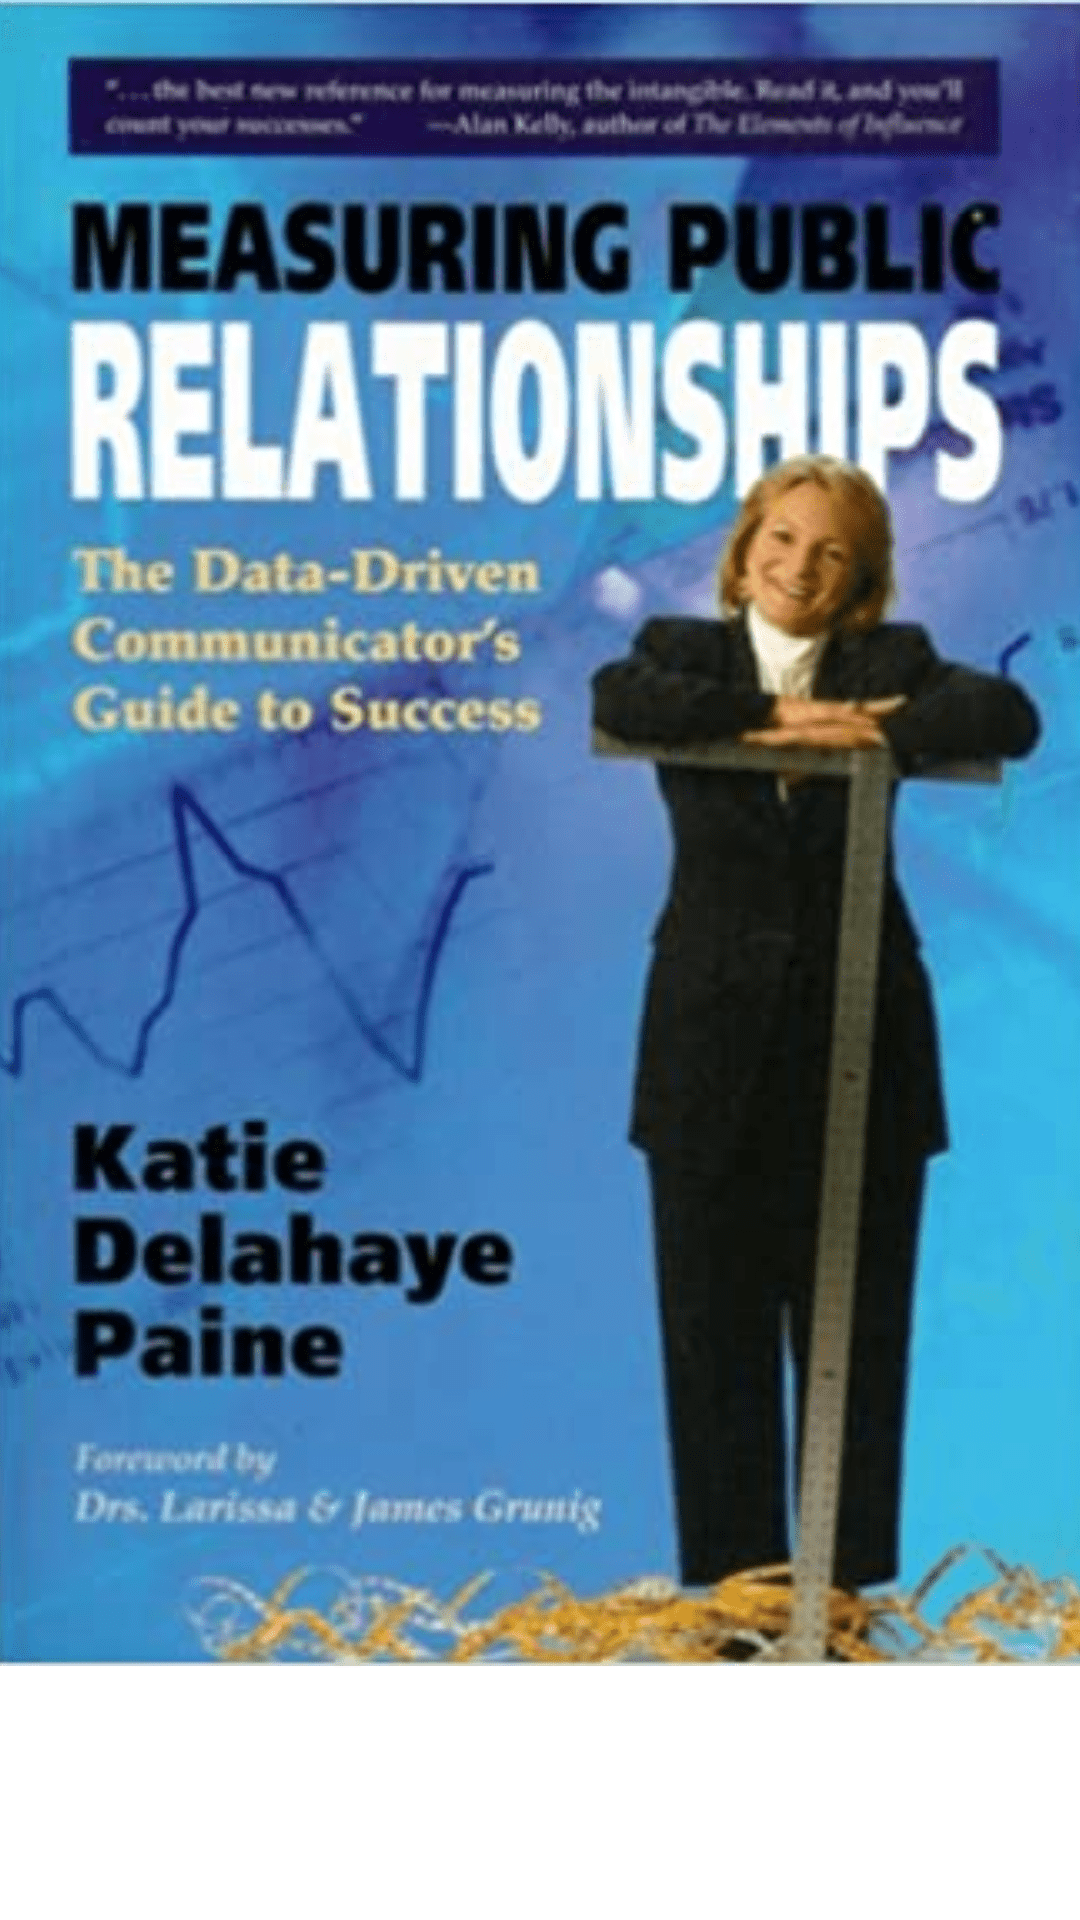 Measuring Public Relationships: The Data-Driven Communicator's Guide to Success